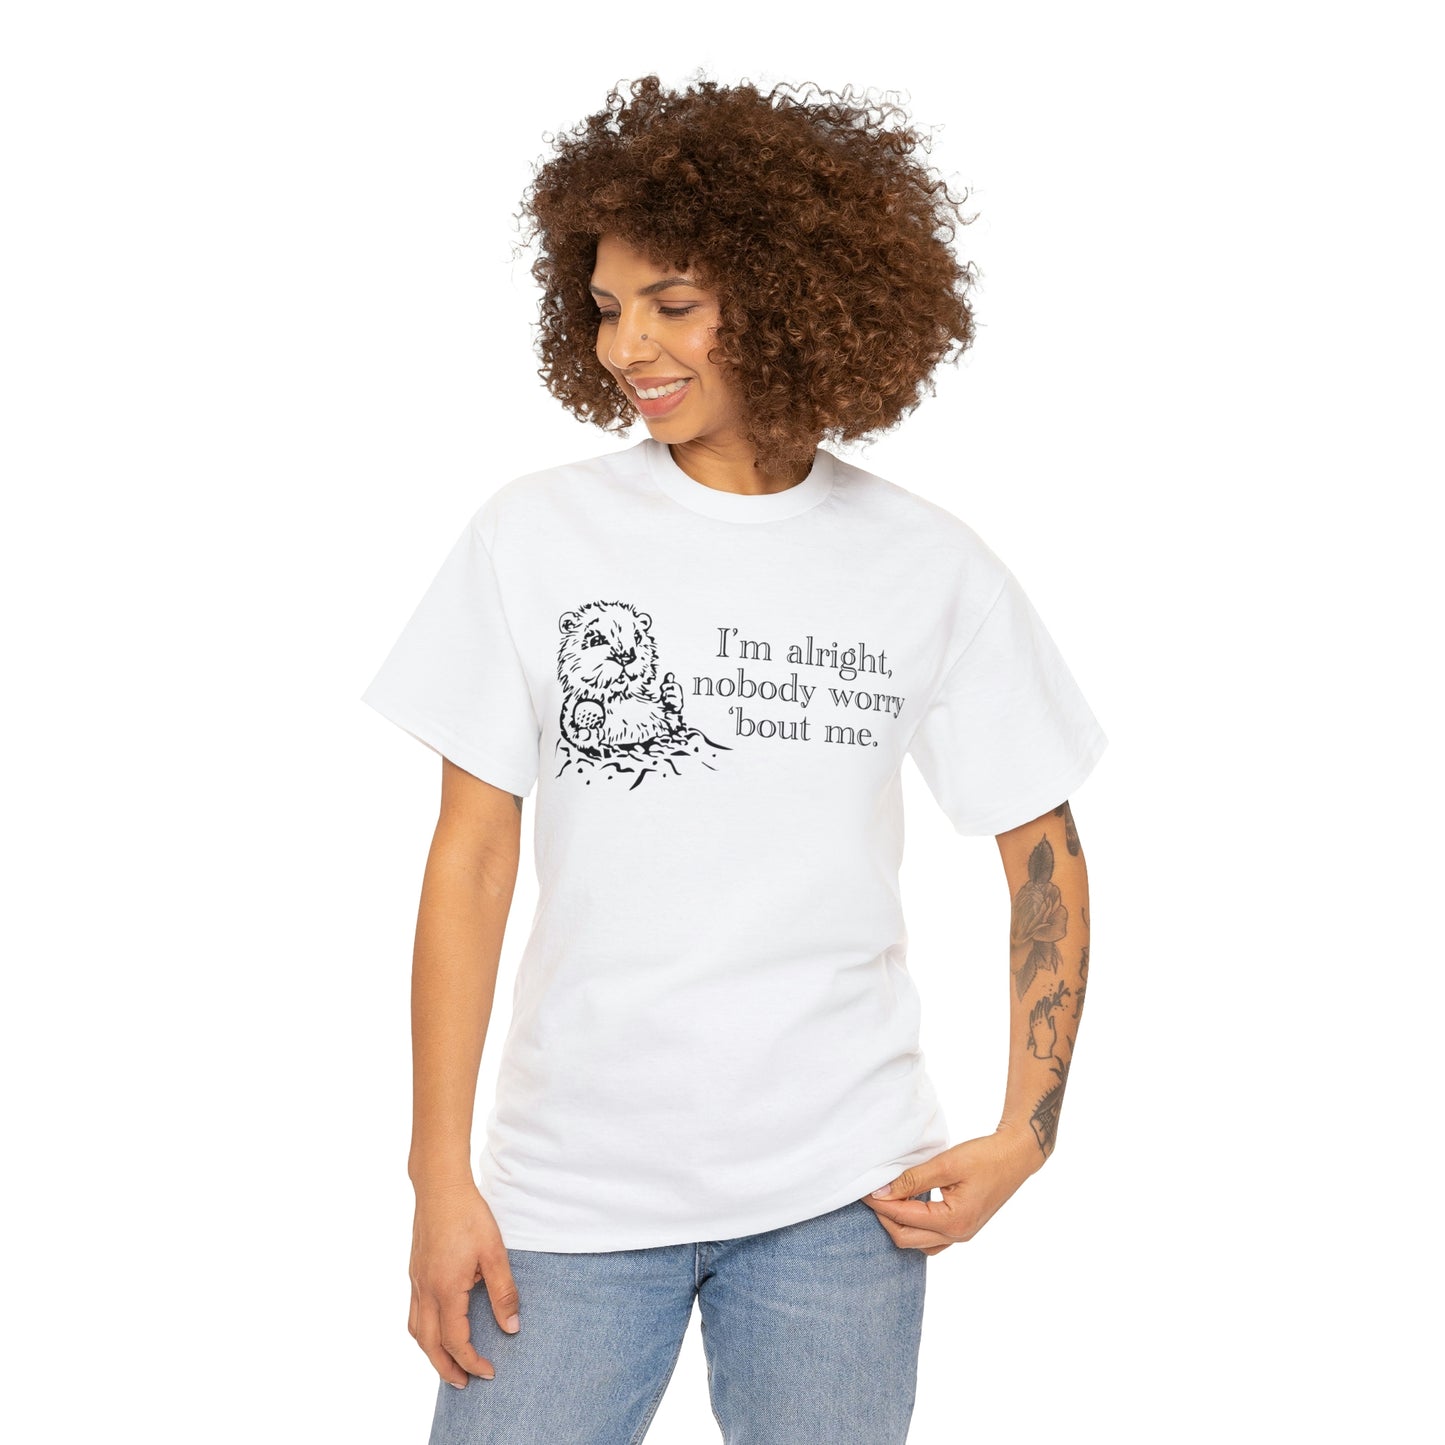 I'm alright dancing gopher (don't worry 'bout me) t-shirt